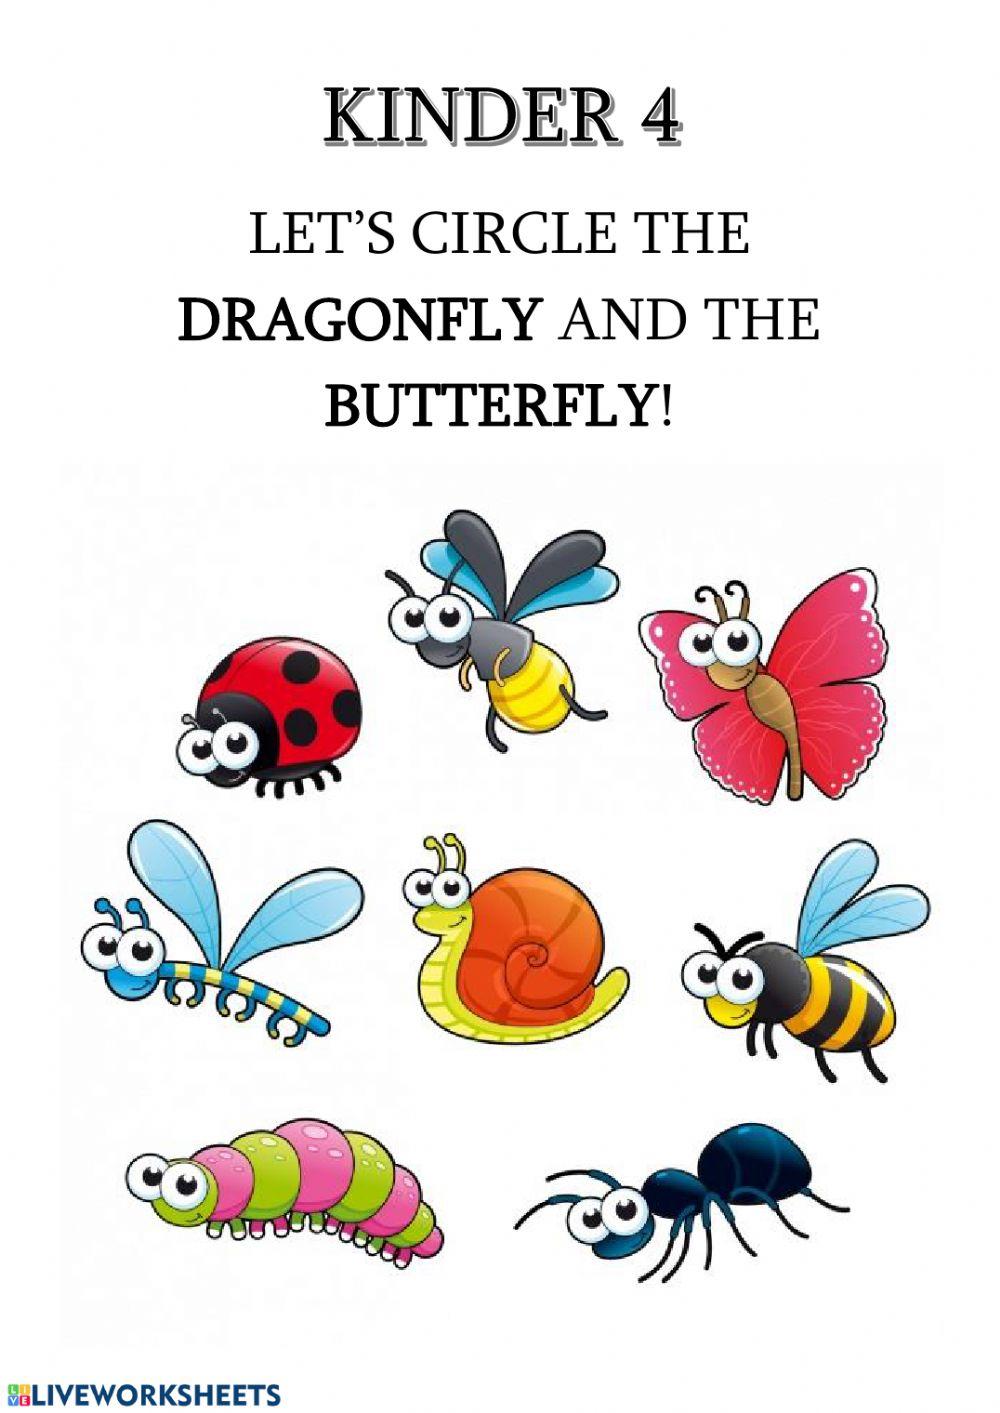 Let's circle the dragonfly and the butterfly